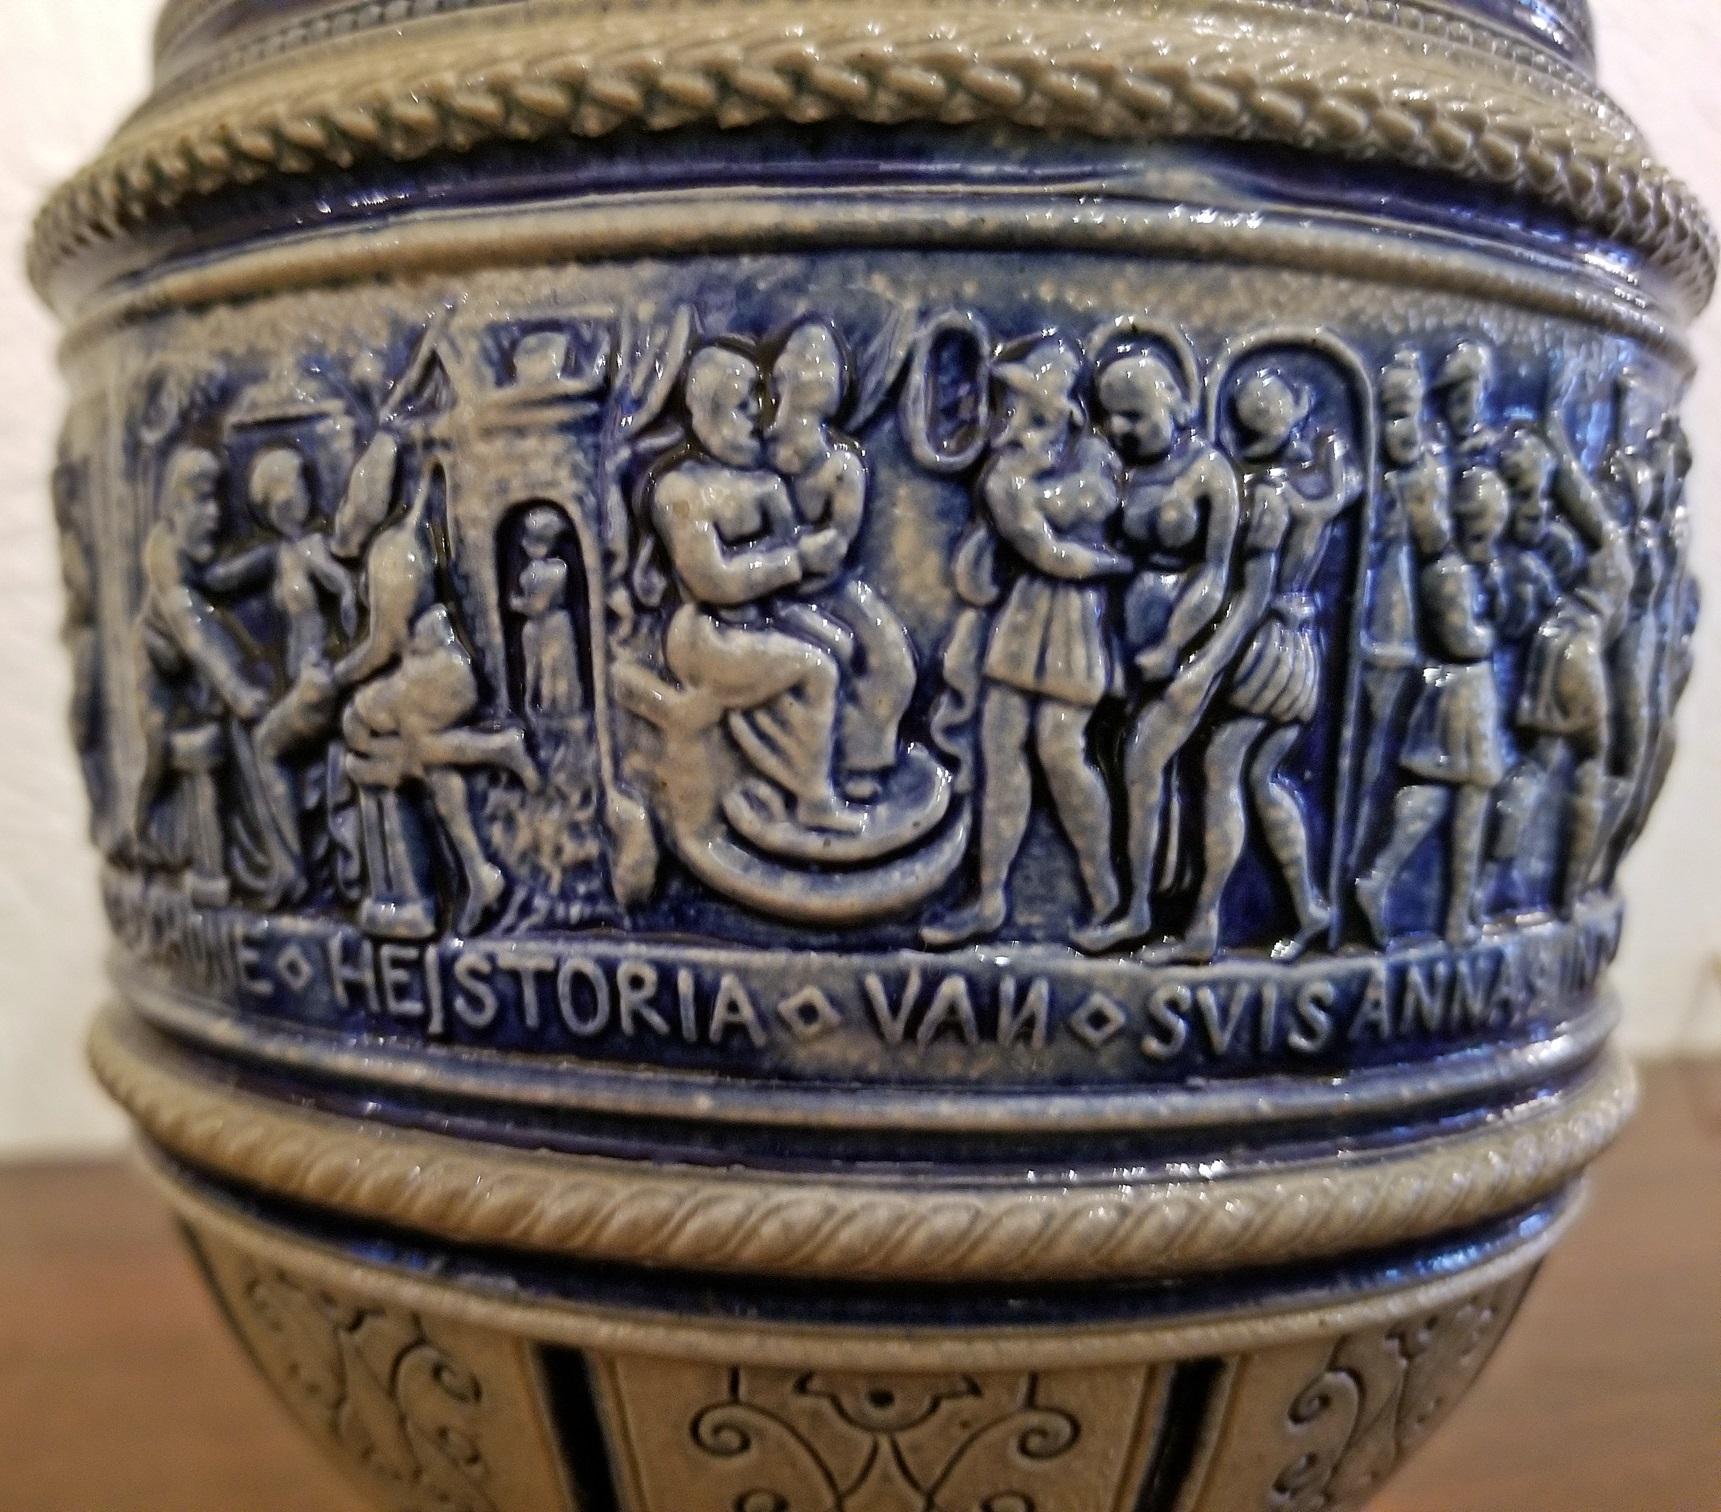 Flemish Salt Glazed Pottery Beer Ewer ft Story of Susanna 1584  In Fair Condition For Sale In Dallas, TX